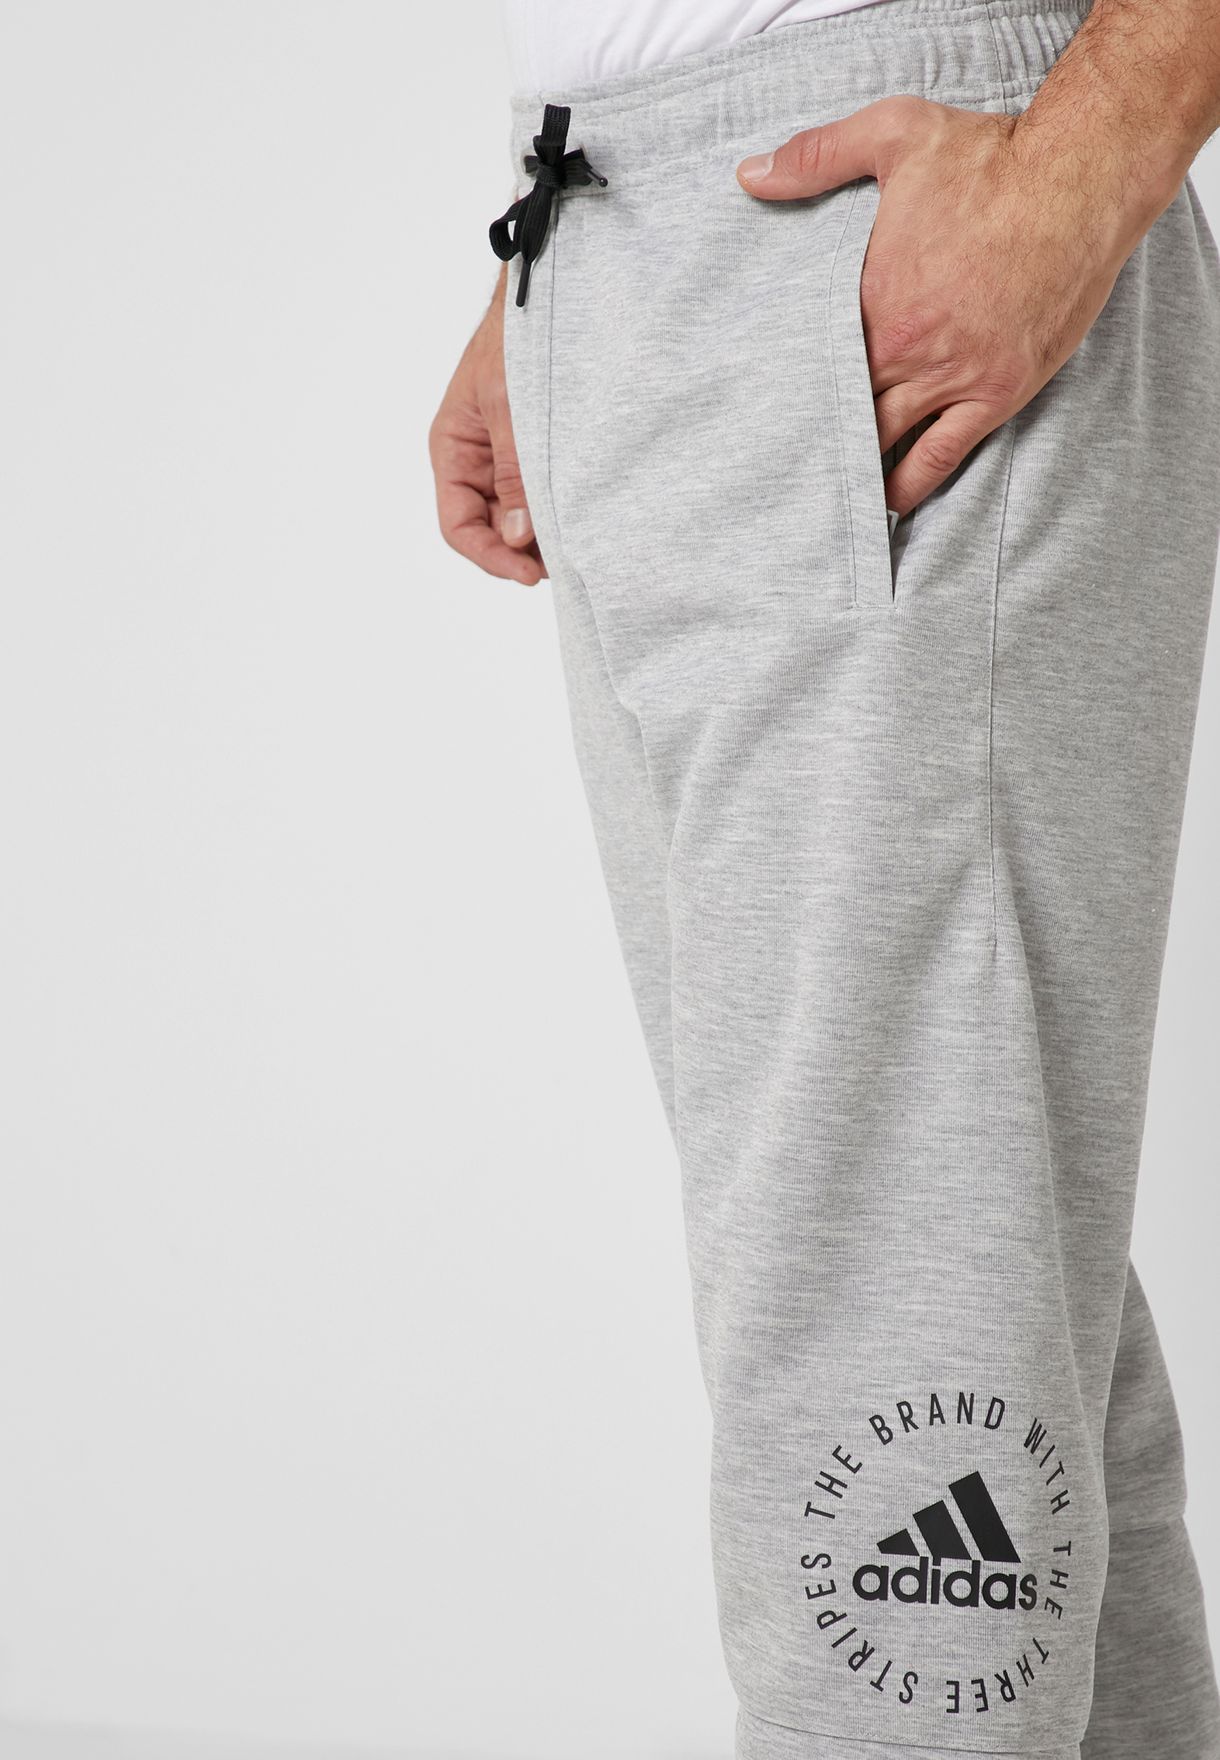 Humanistic Wither folder Buy adidas grey SID Sweatpants for Men in MENA, Worldwide